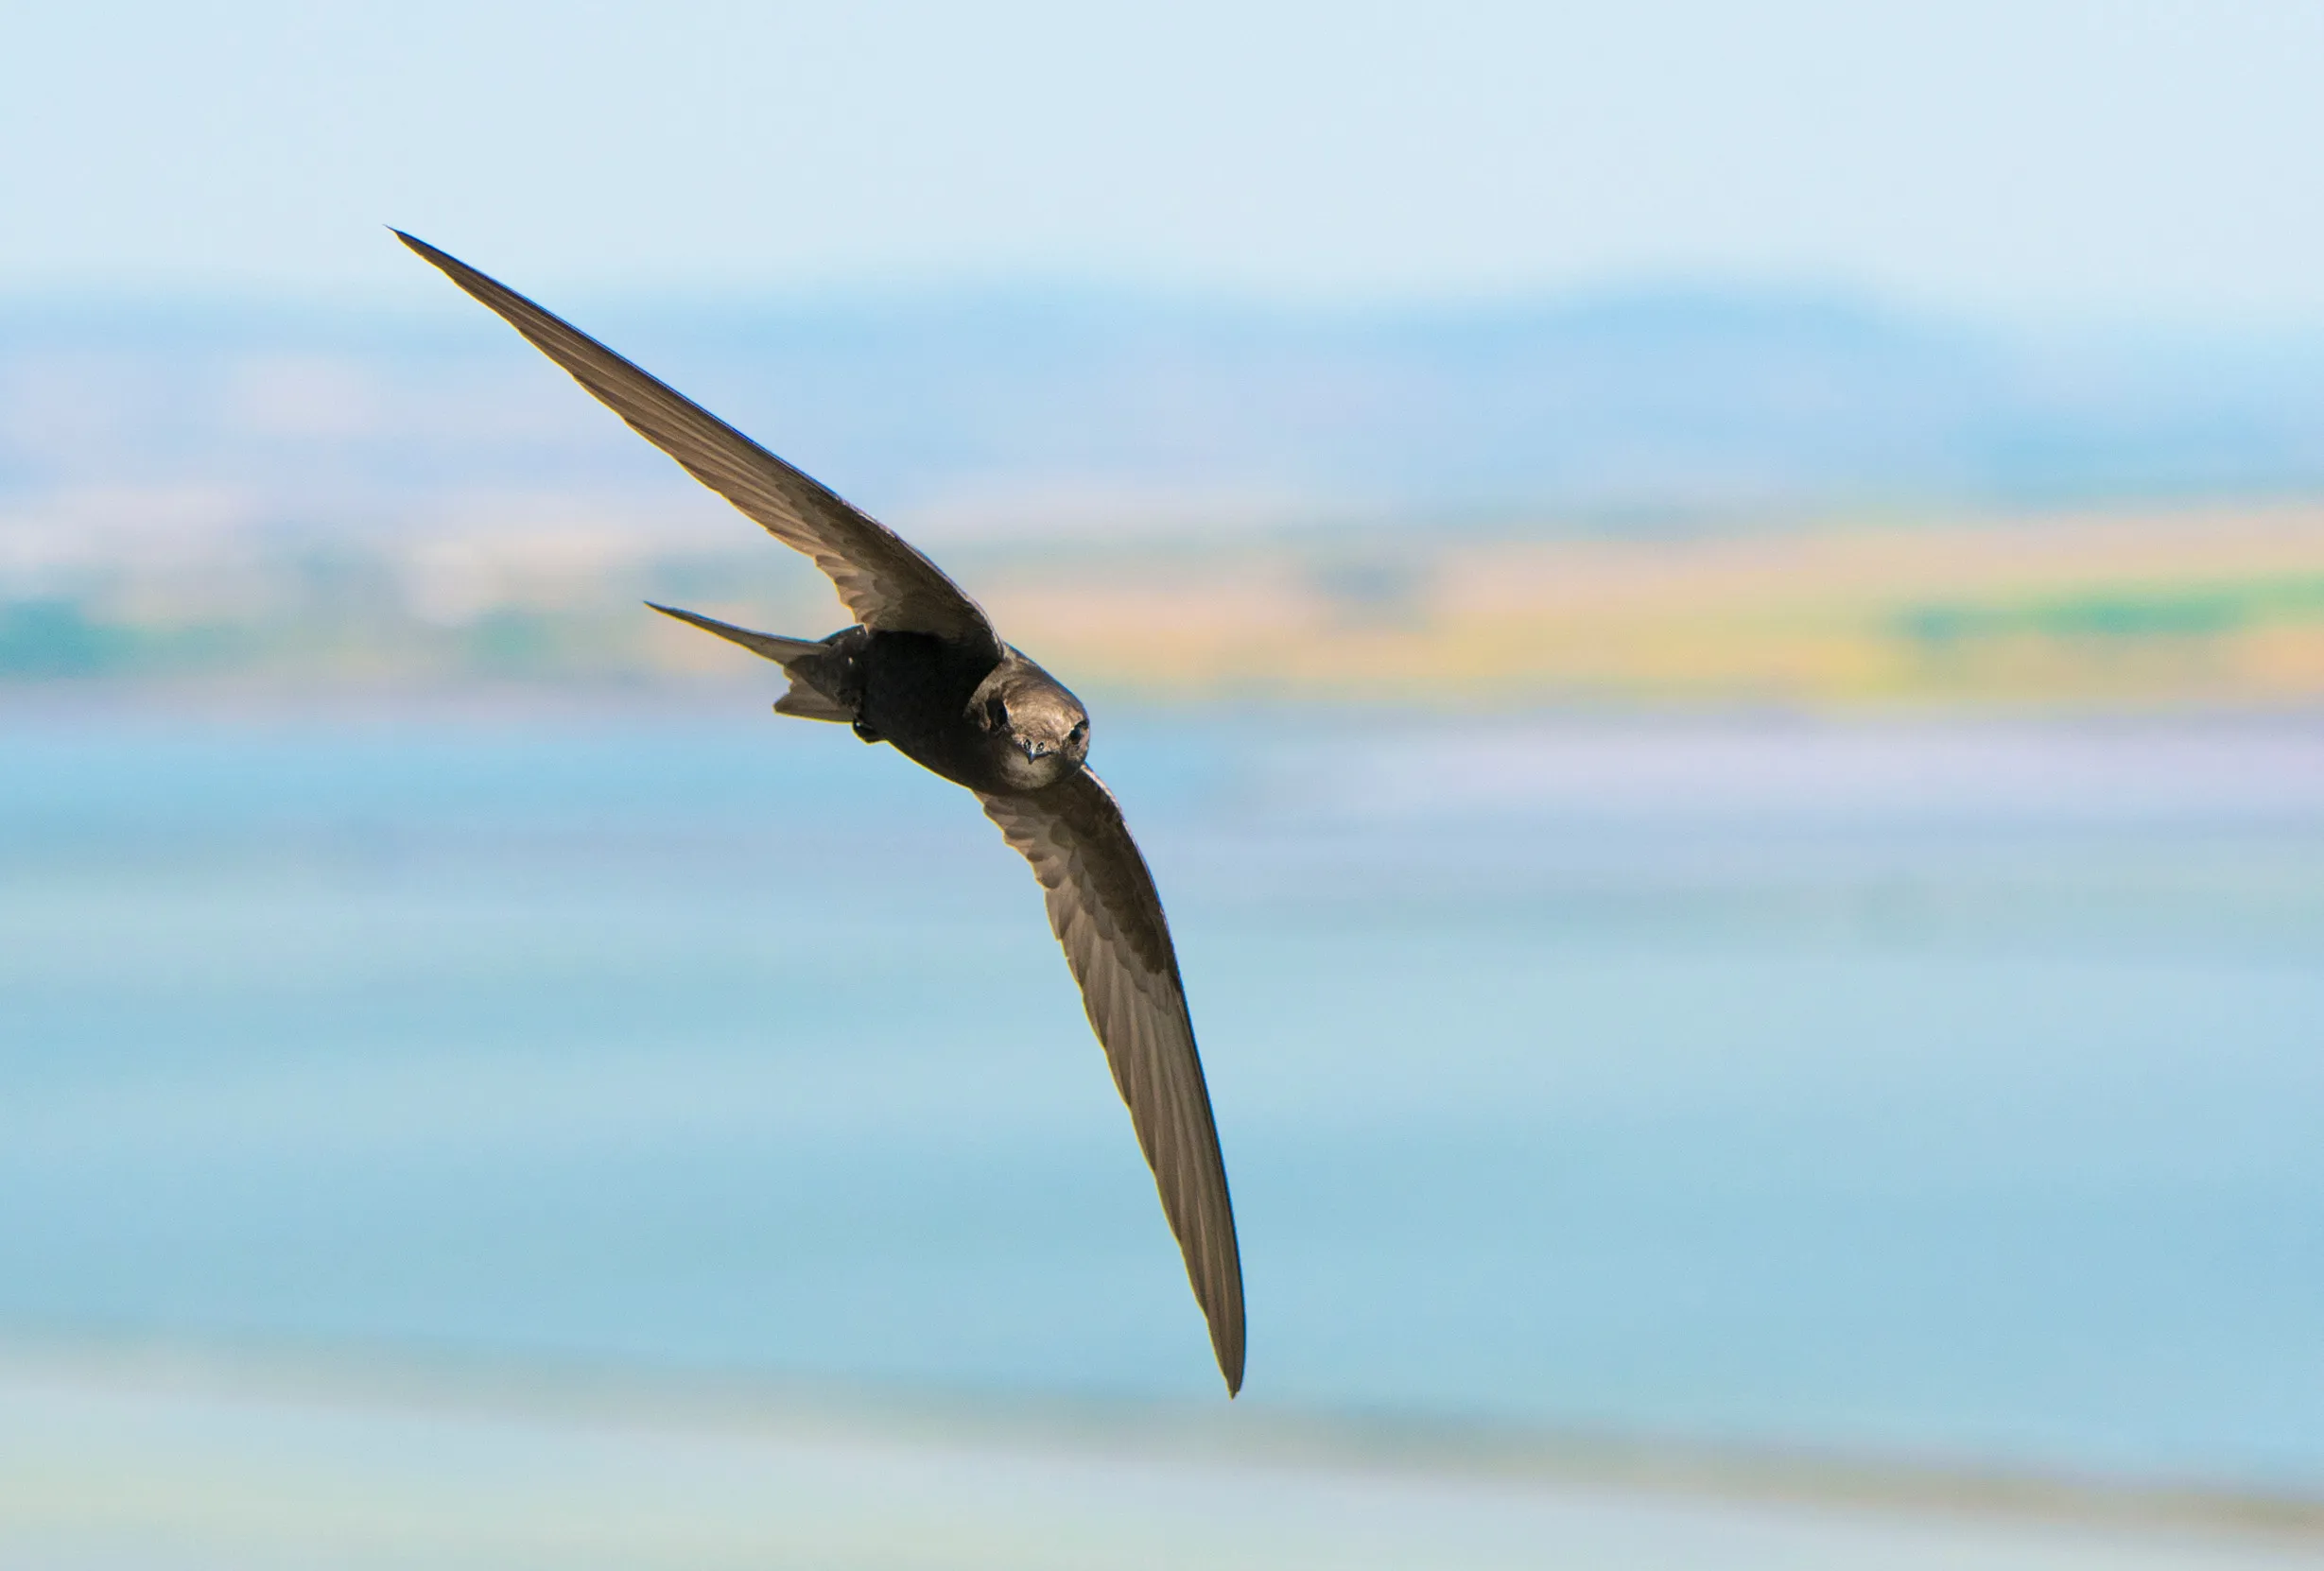 A Swift flying over a body of water with fields surrounding.